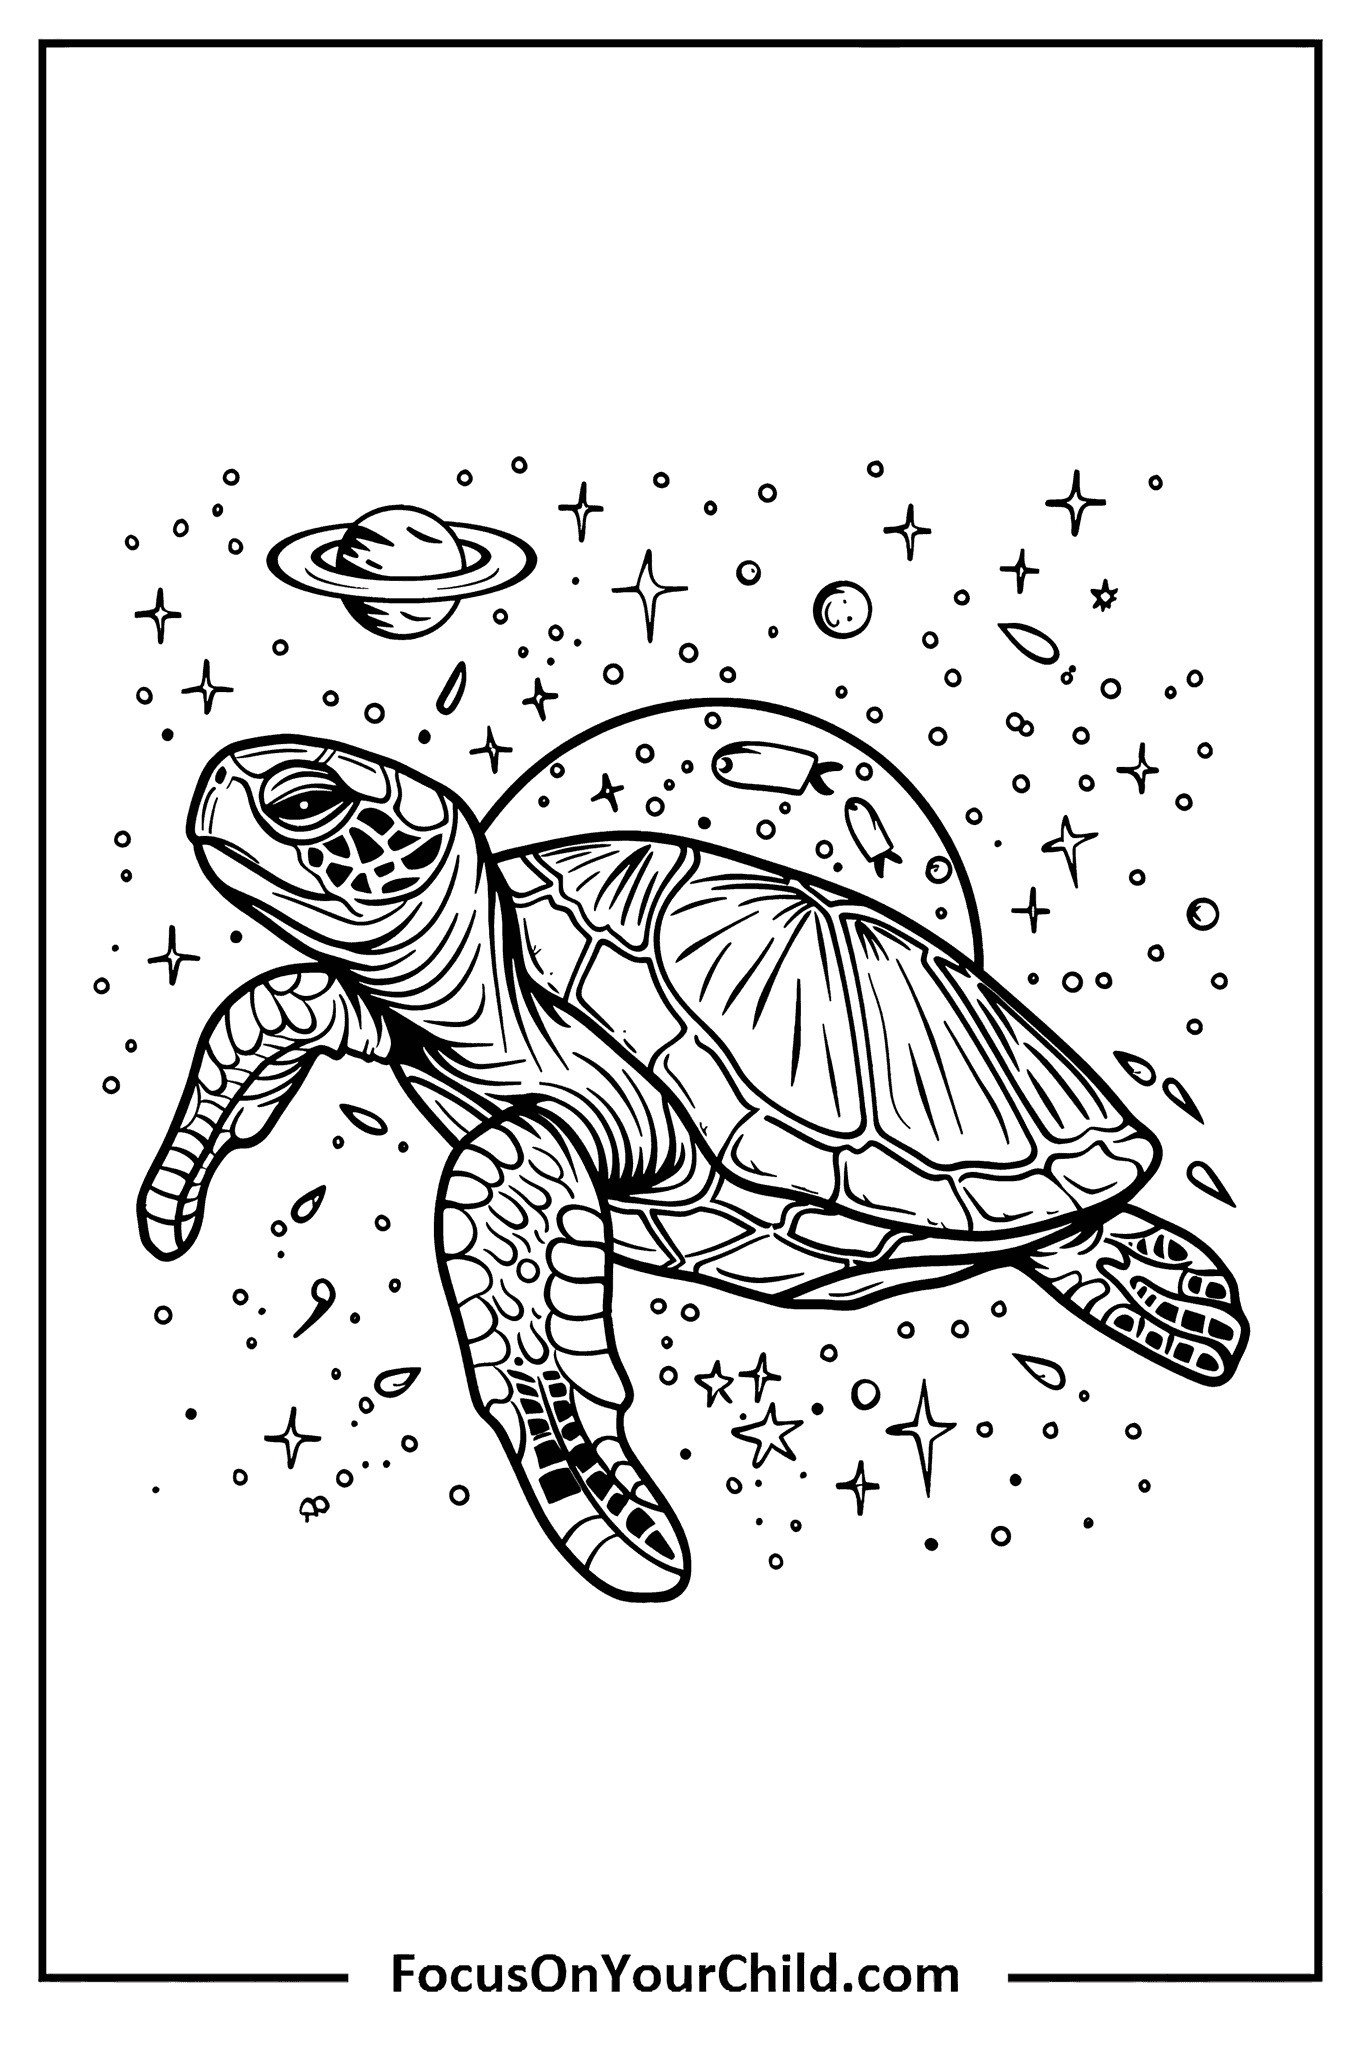 Turtle swimming in space with stars and planets in detailed line drawing.